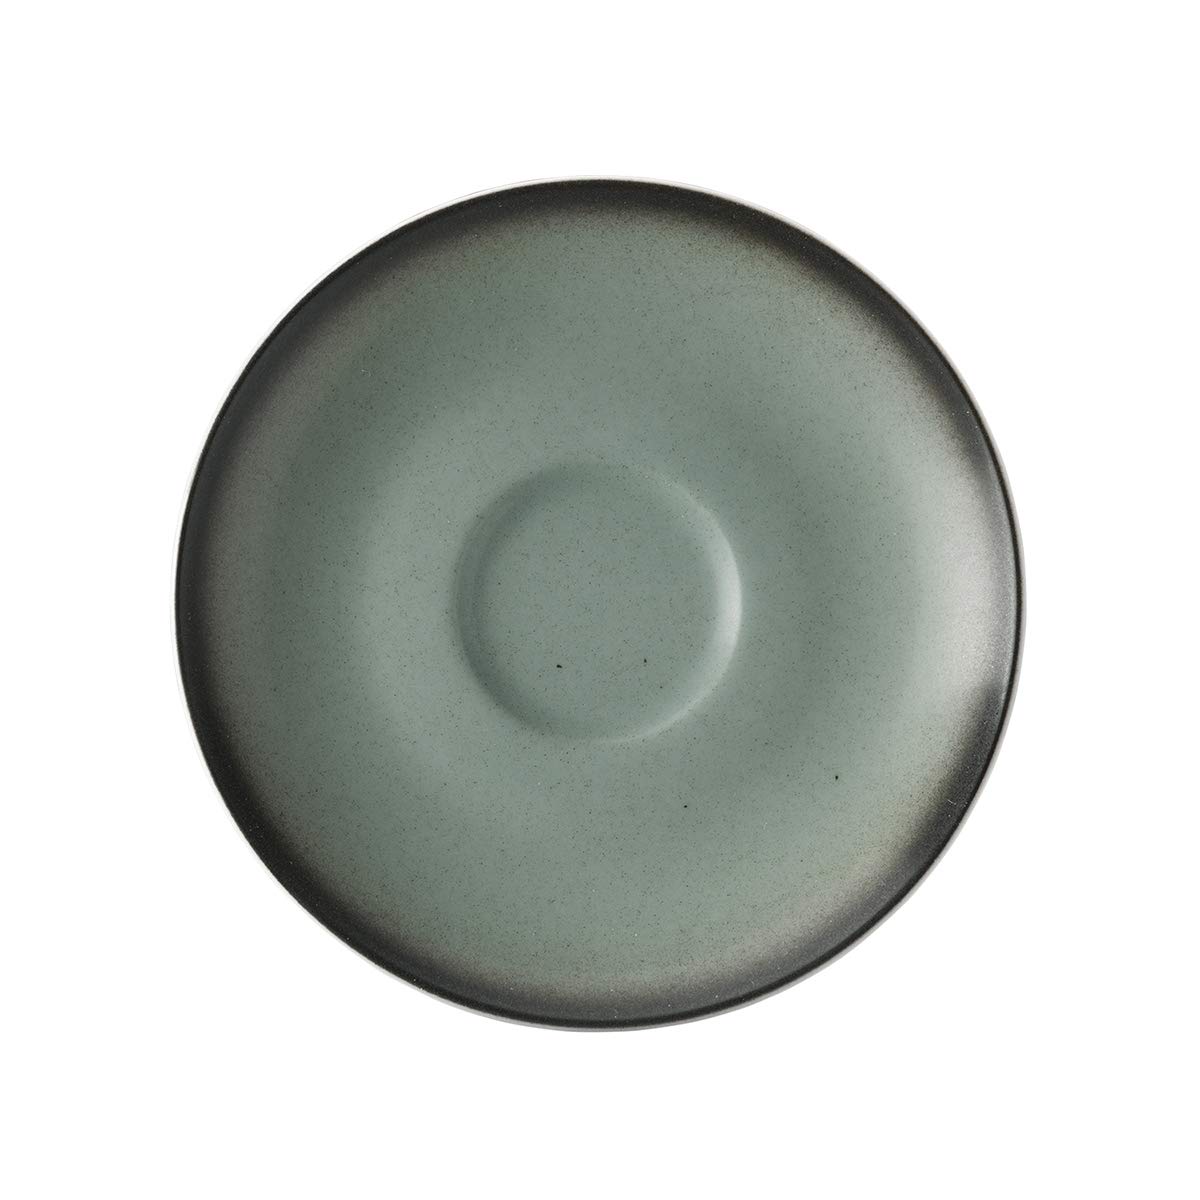 Seltmann Weiden – Turquoise – Saucer for Espresso Cup – Porcelain Fine Dining 001.736328 Coup 1132